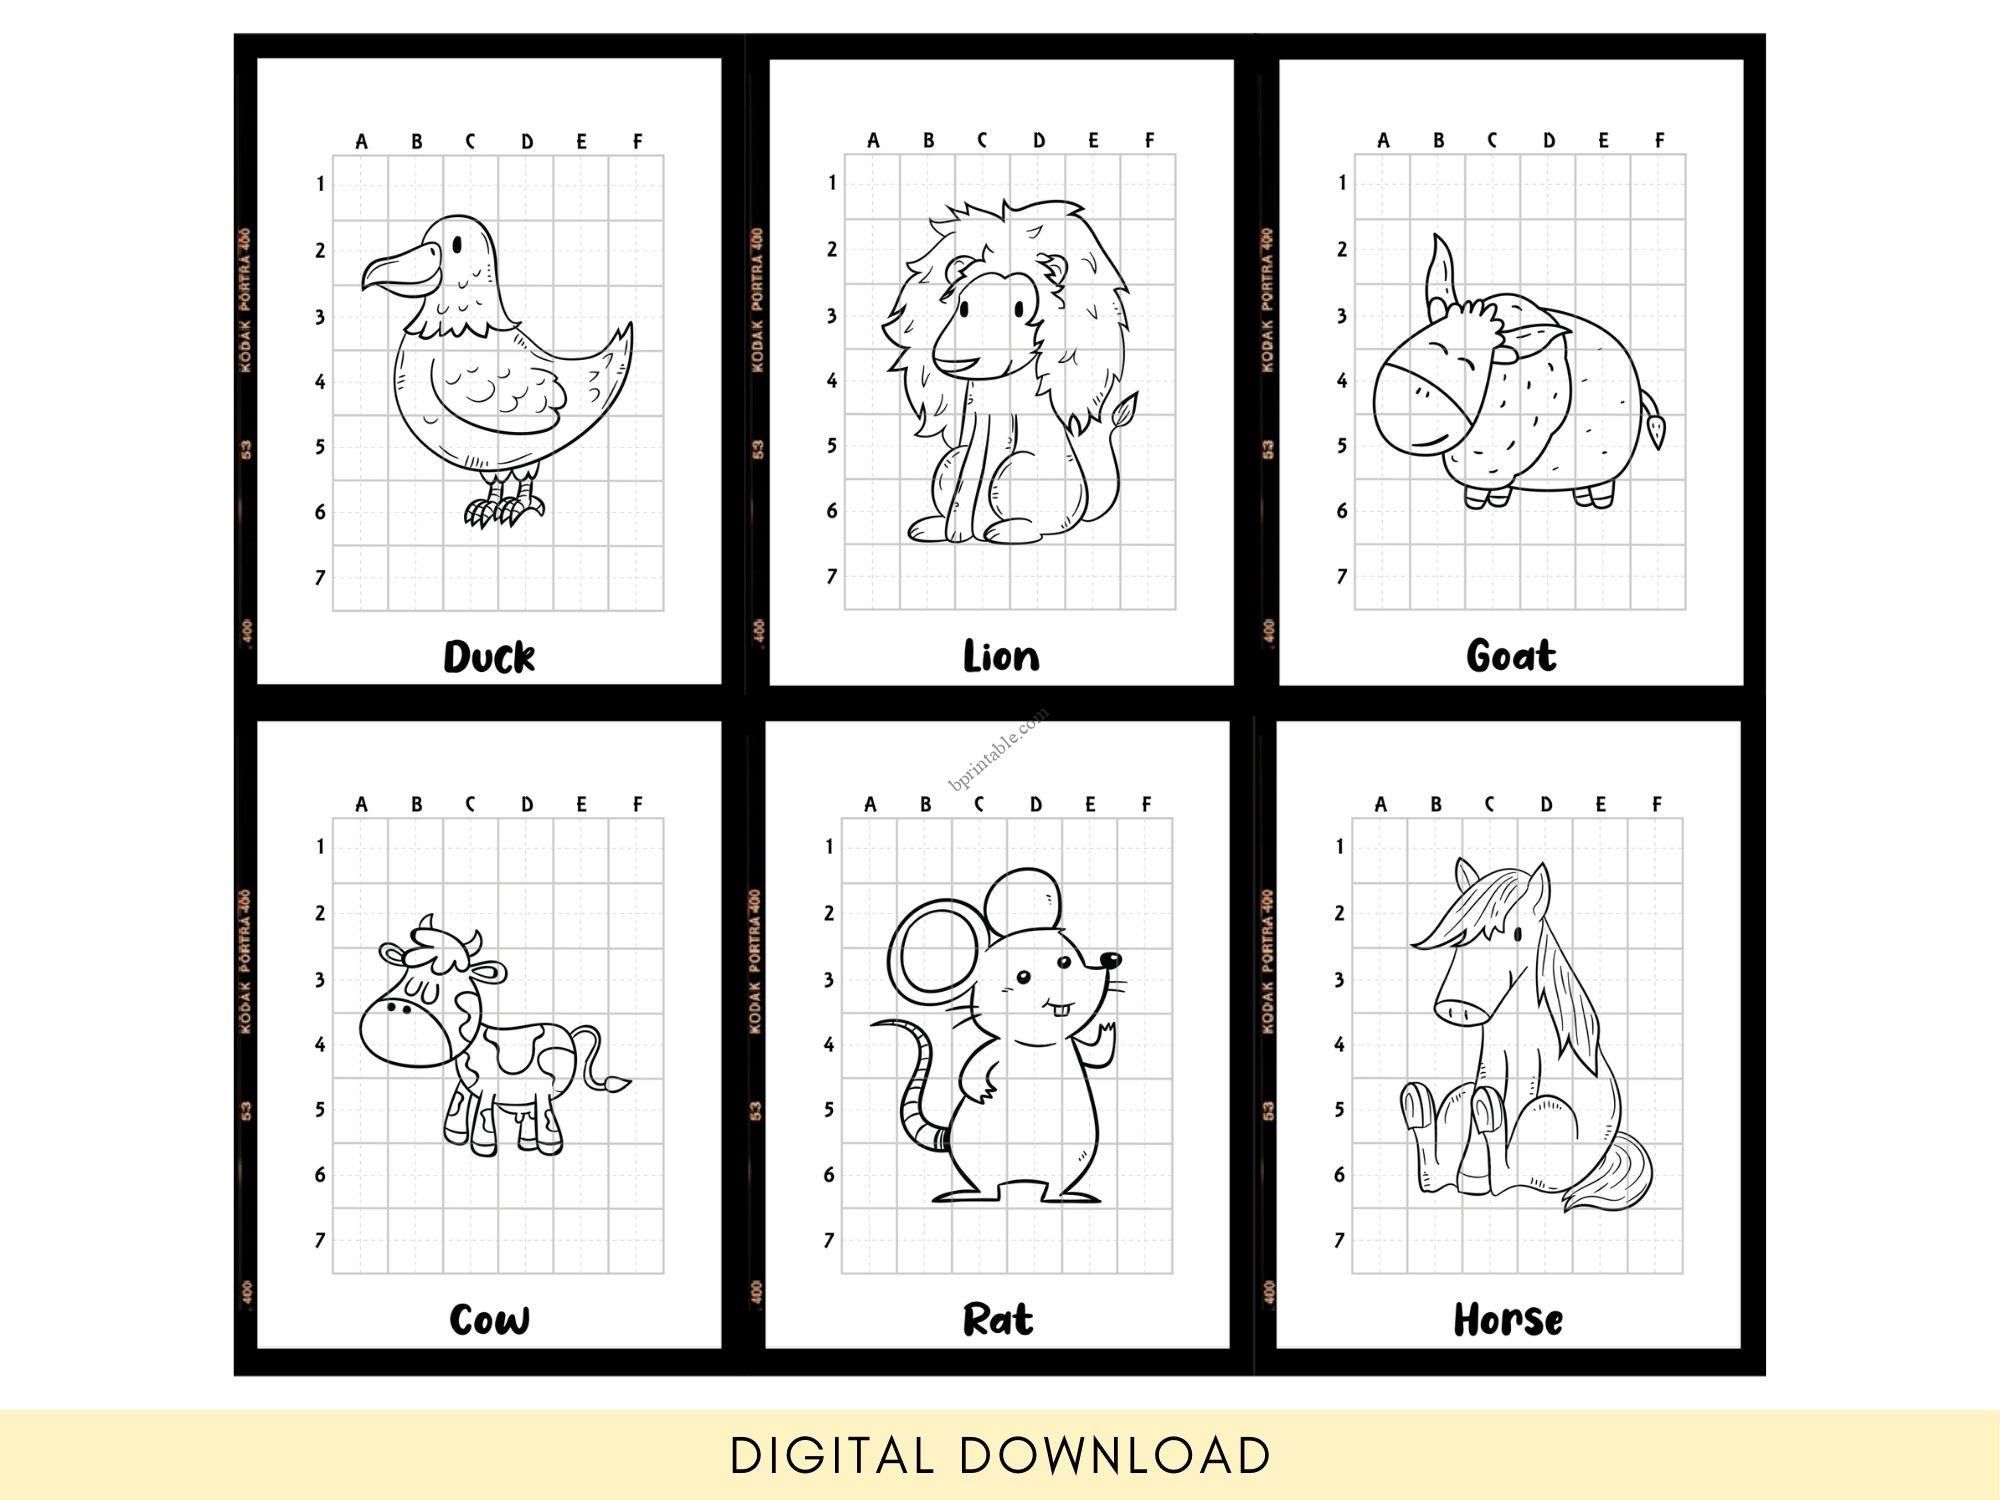 How To Draw Book, How to Draw Cute Animals | bprintable.com